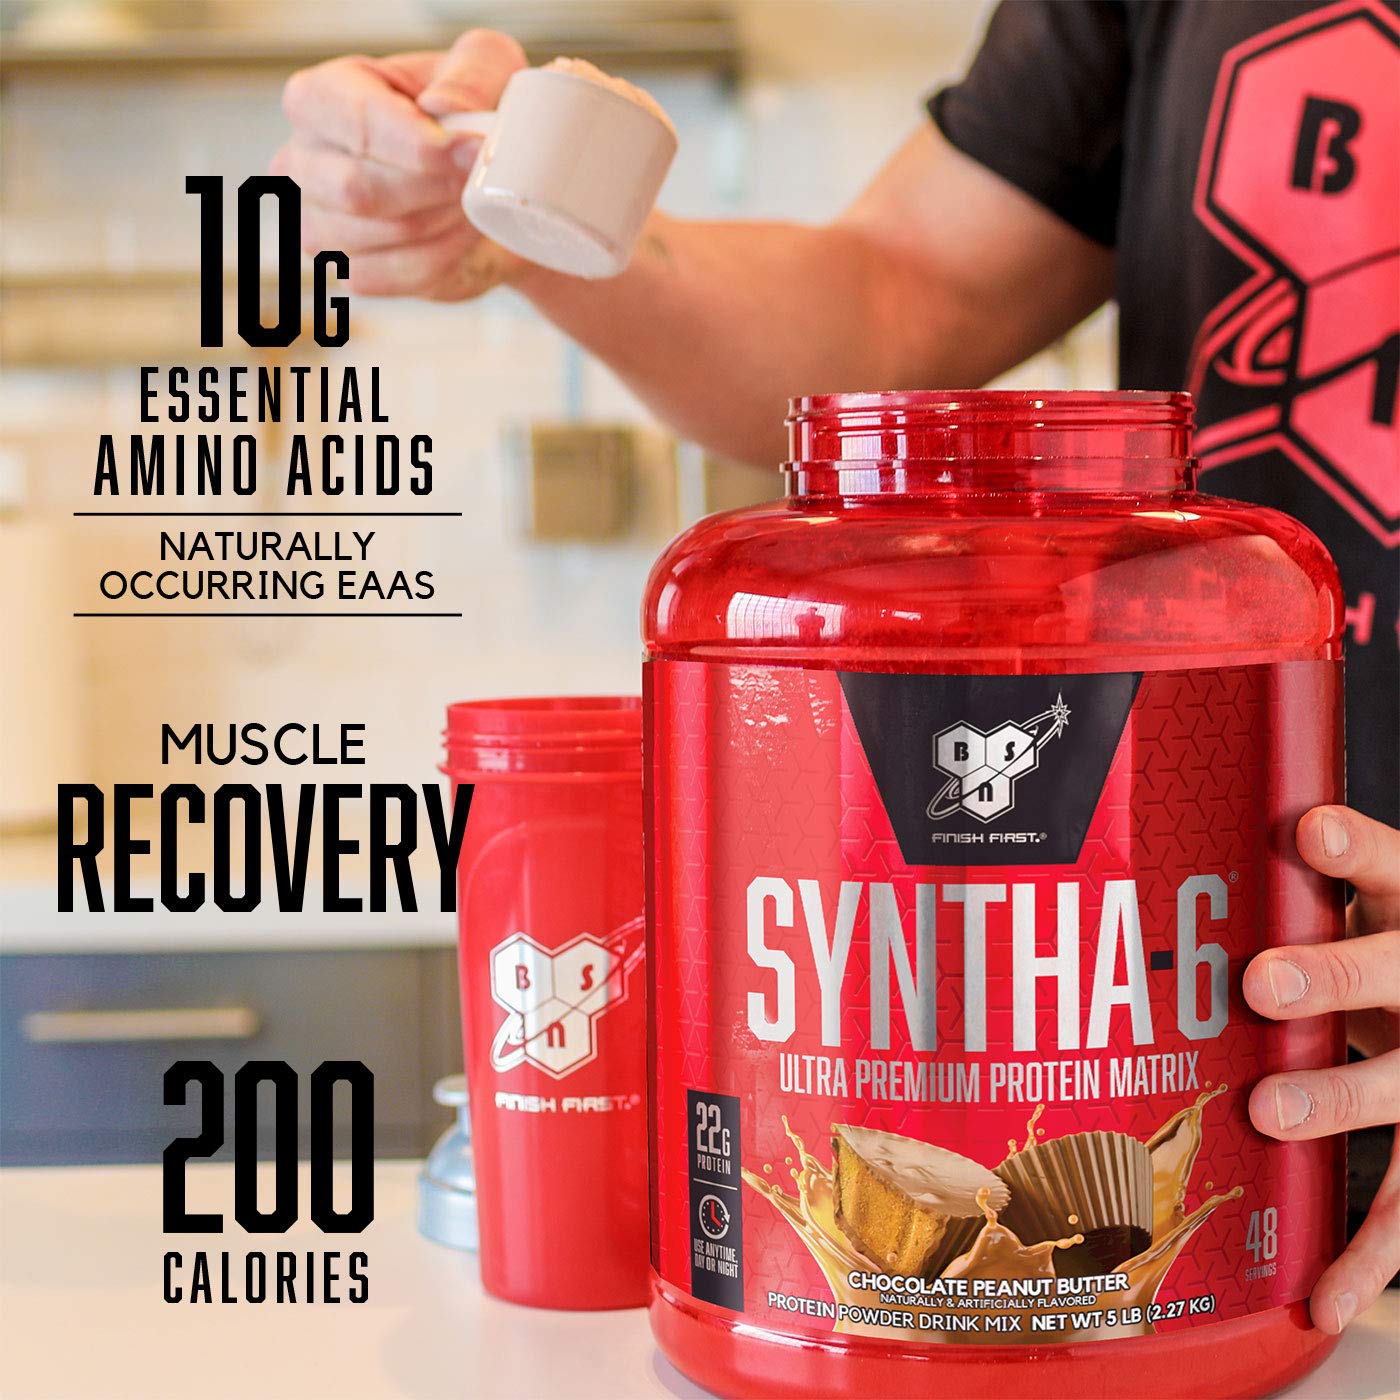 BSN SYNTHA-6 Whey Protein Powder, Micellar Casein, Milk Protein Isolate, Chocolate Milkshake, 48 Servings (Packaging May Vary)